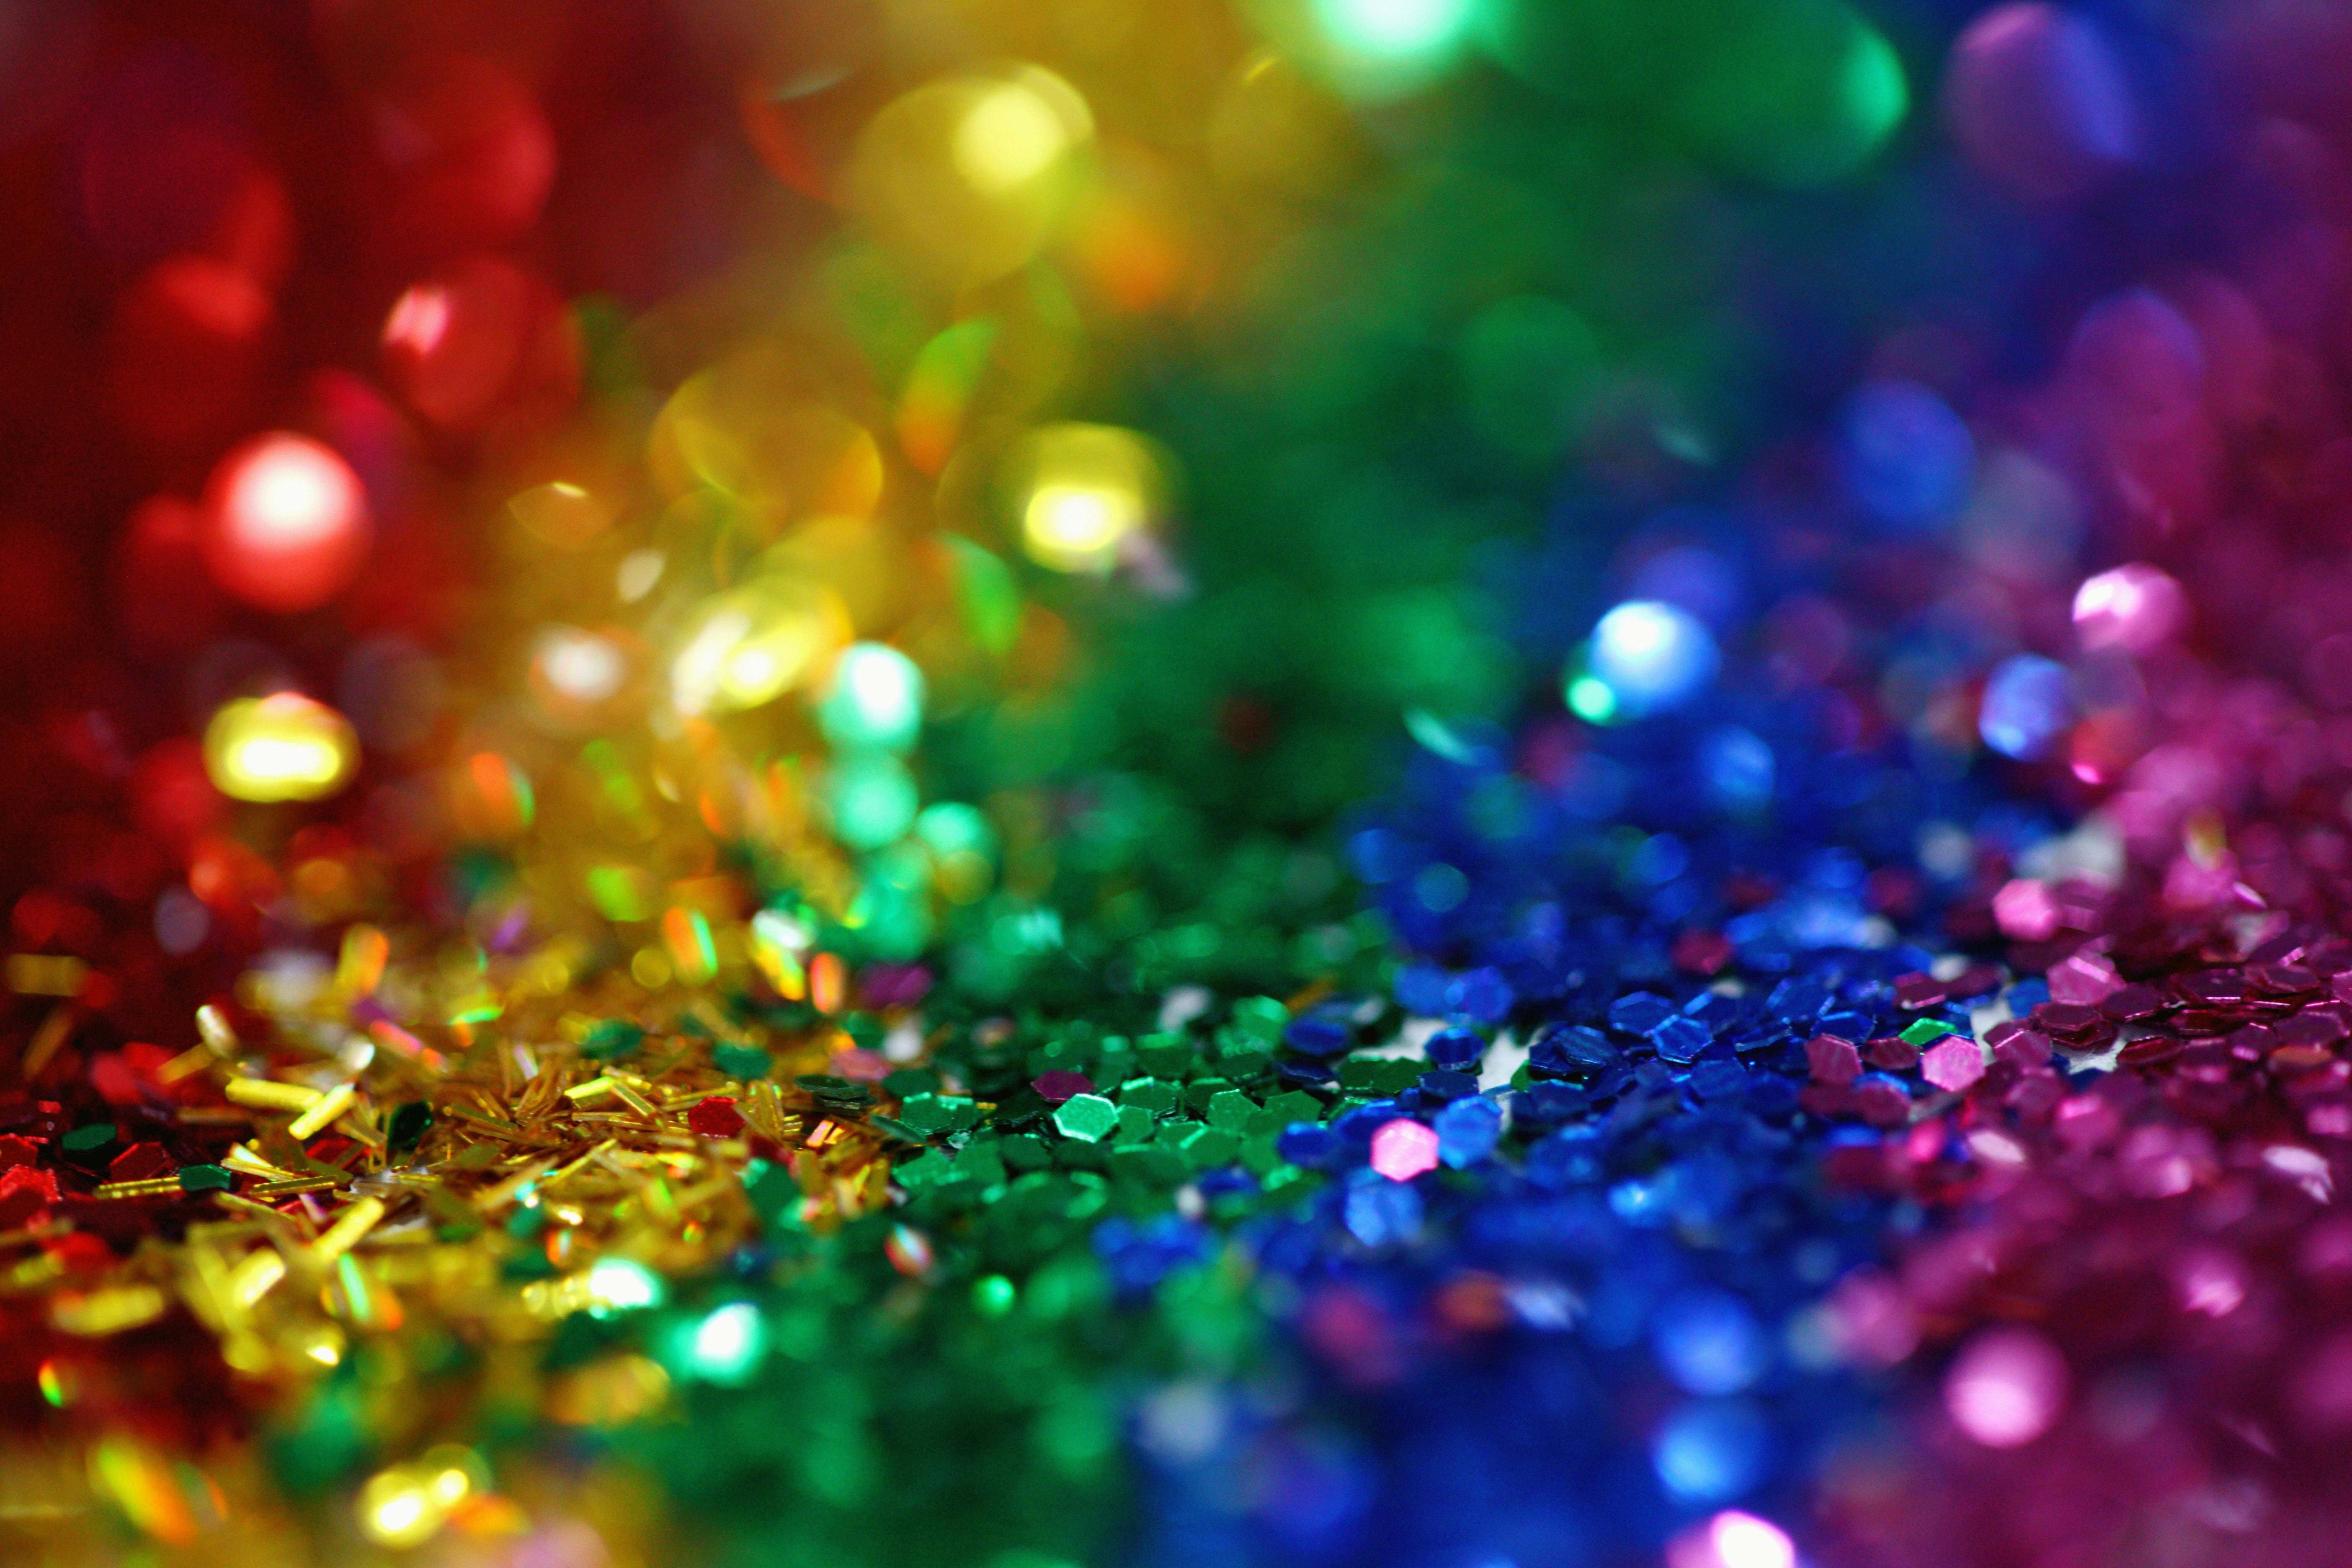 Whimsical and colorful rainbow glitter background perfect for celebrating the LGBTQIA community and gay pride 2018.